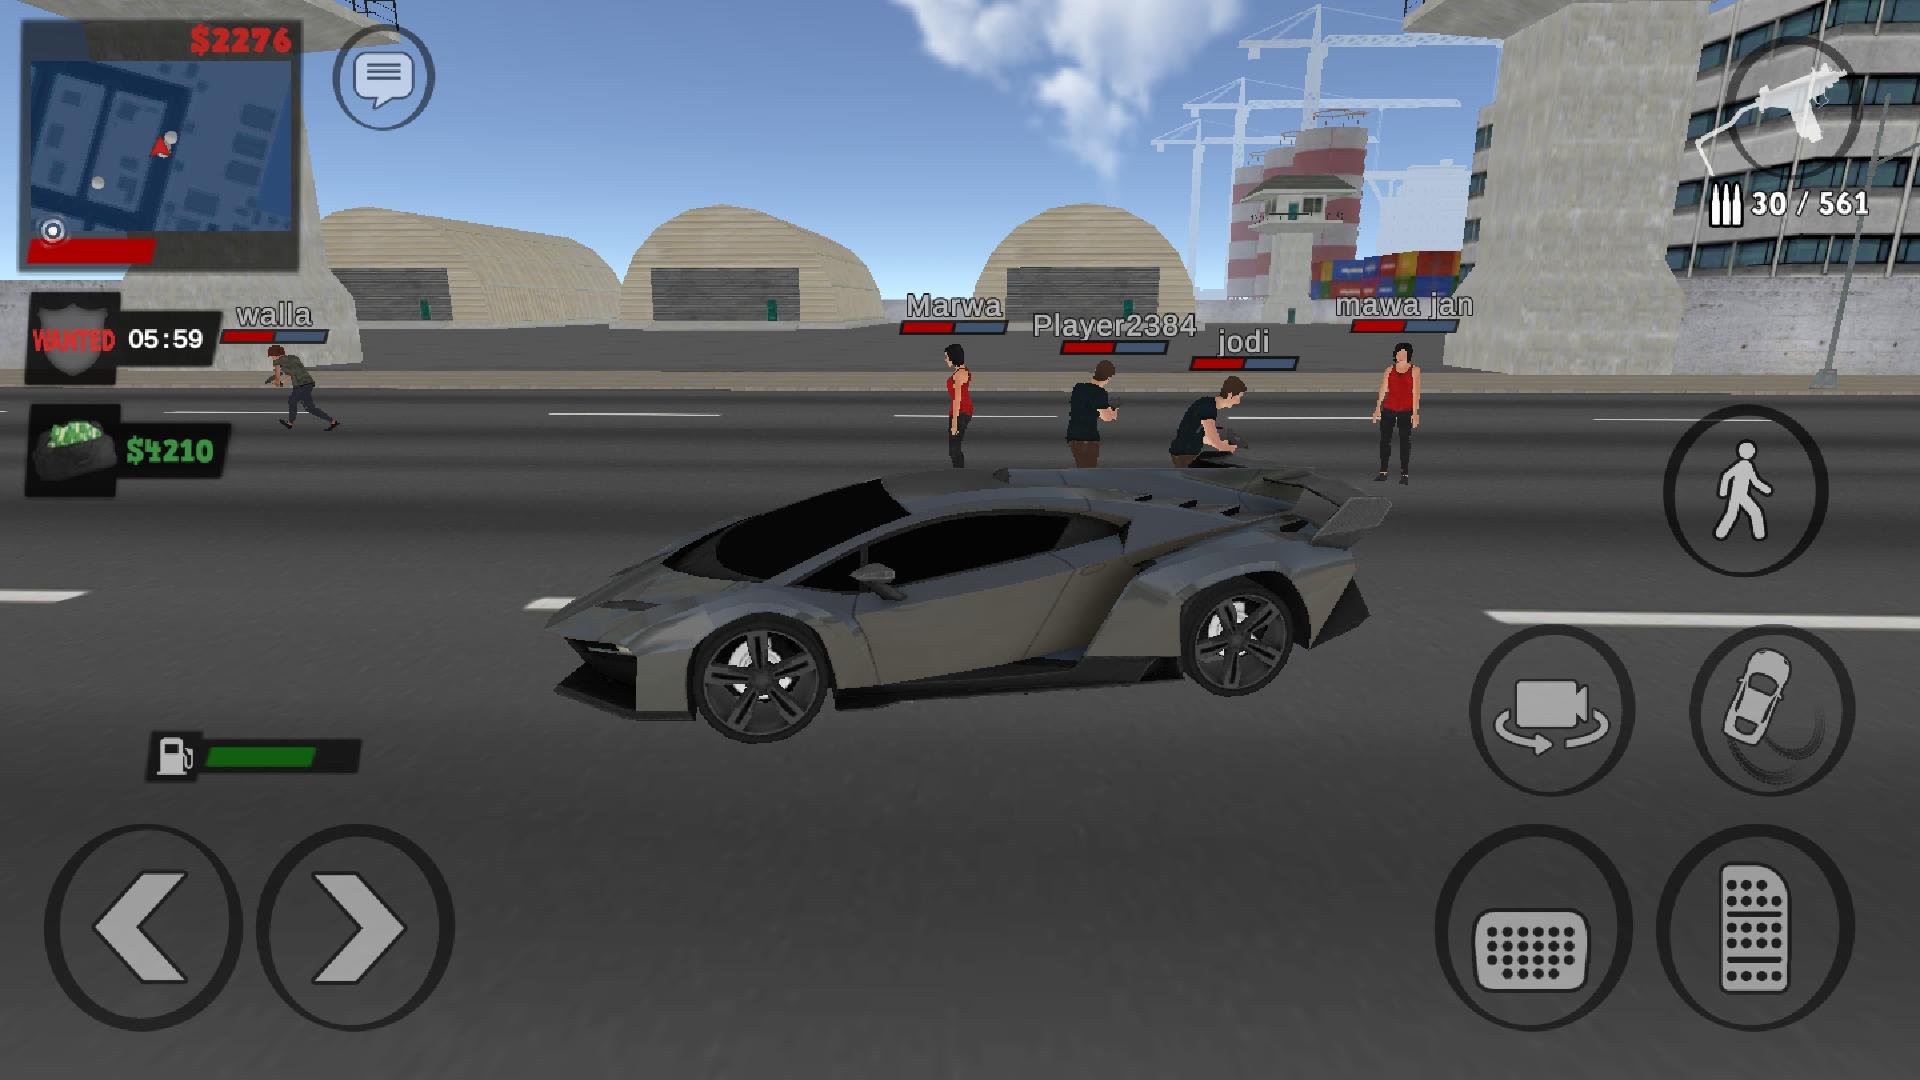 Scarica Justice Rivals 3 Cops&Robbers gratis per Android.